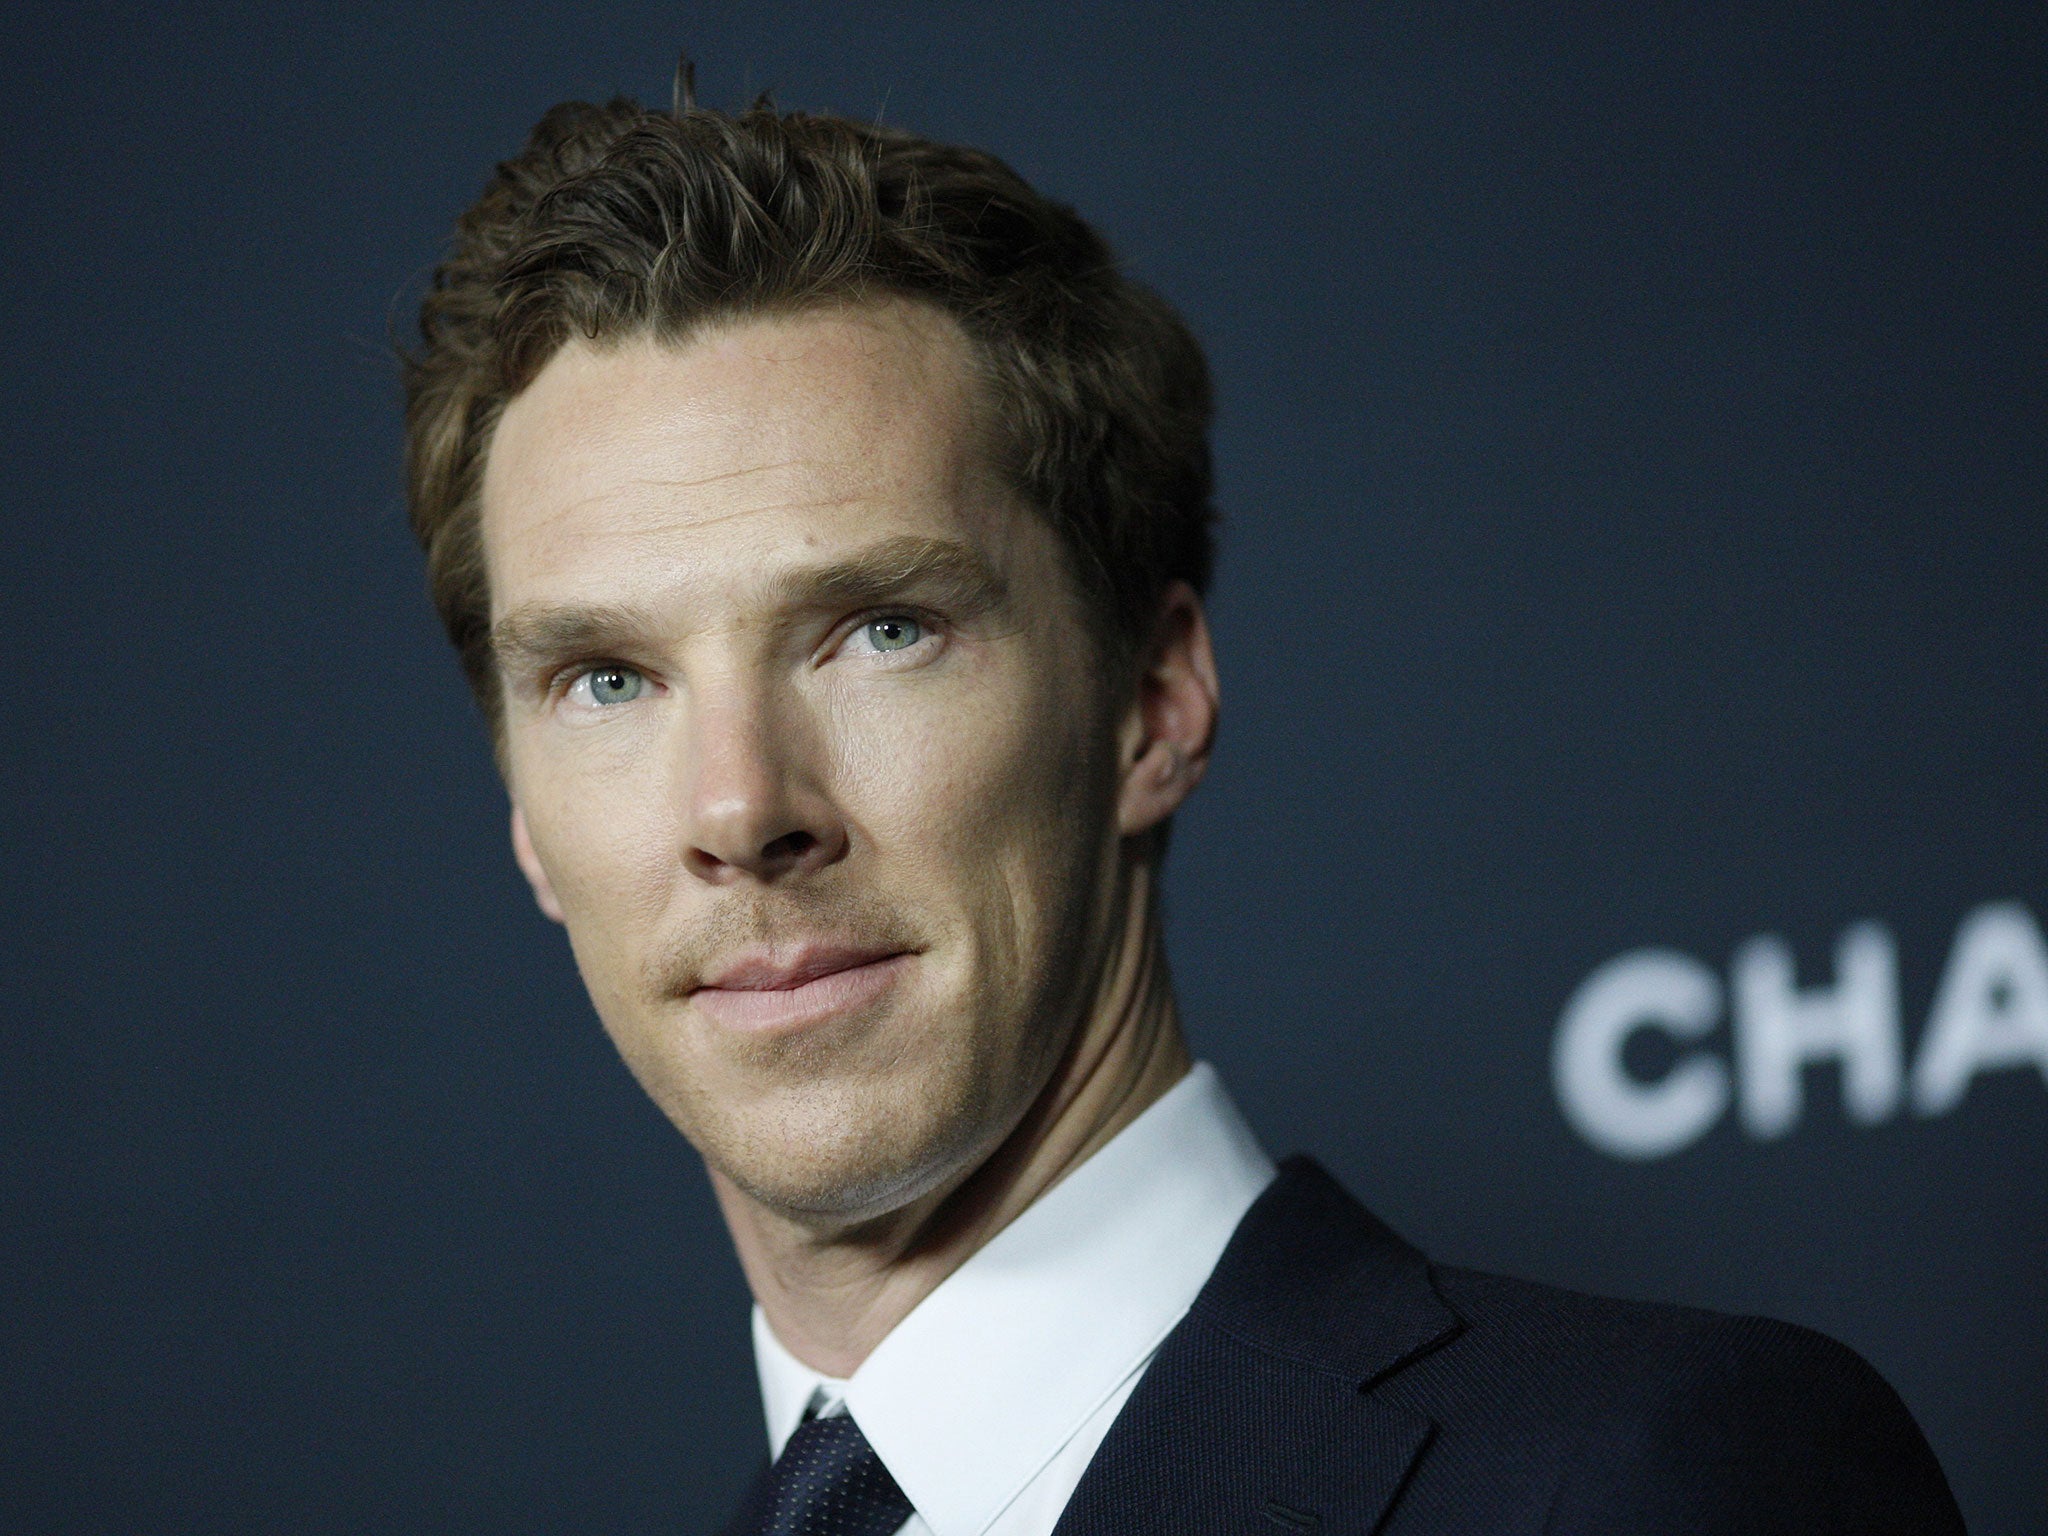 Benedict Cumberbatch attends a special screening of his latest film The Imitation Game